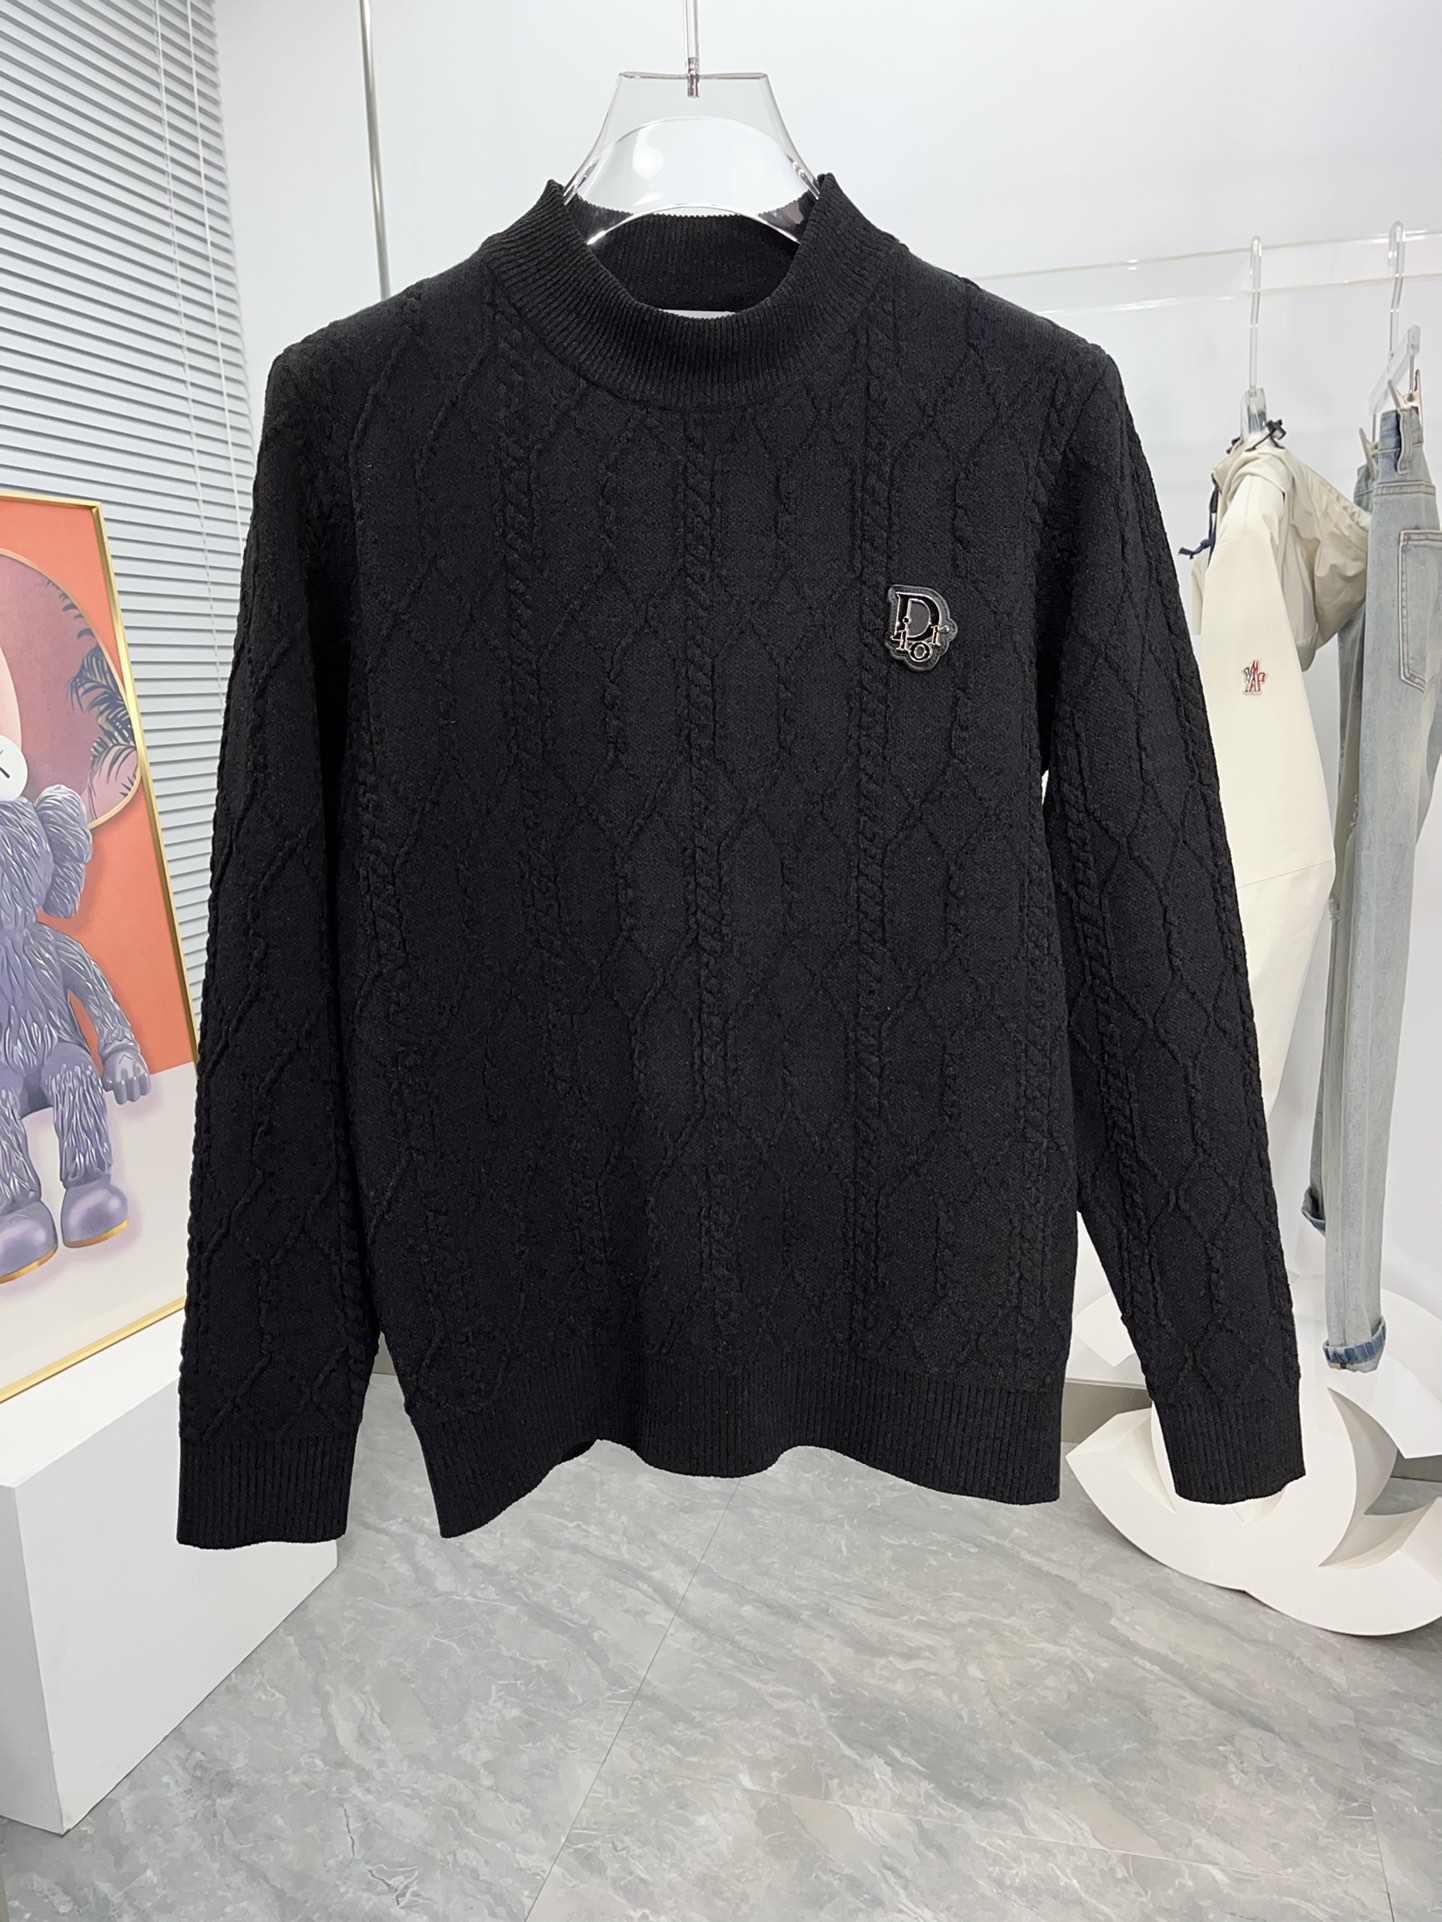 Dior Clothing Sweatshirts Men Cashmere Knitting Fall/Winter Collection Fashion Long Sleeve